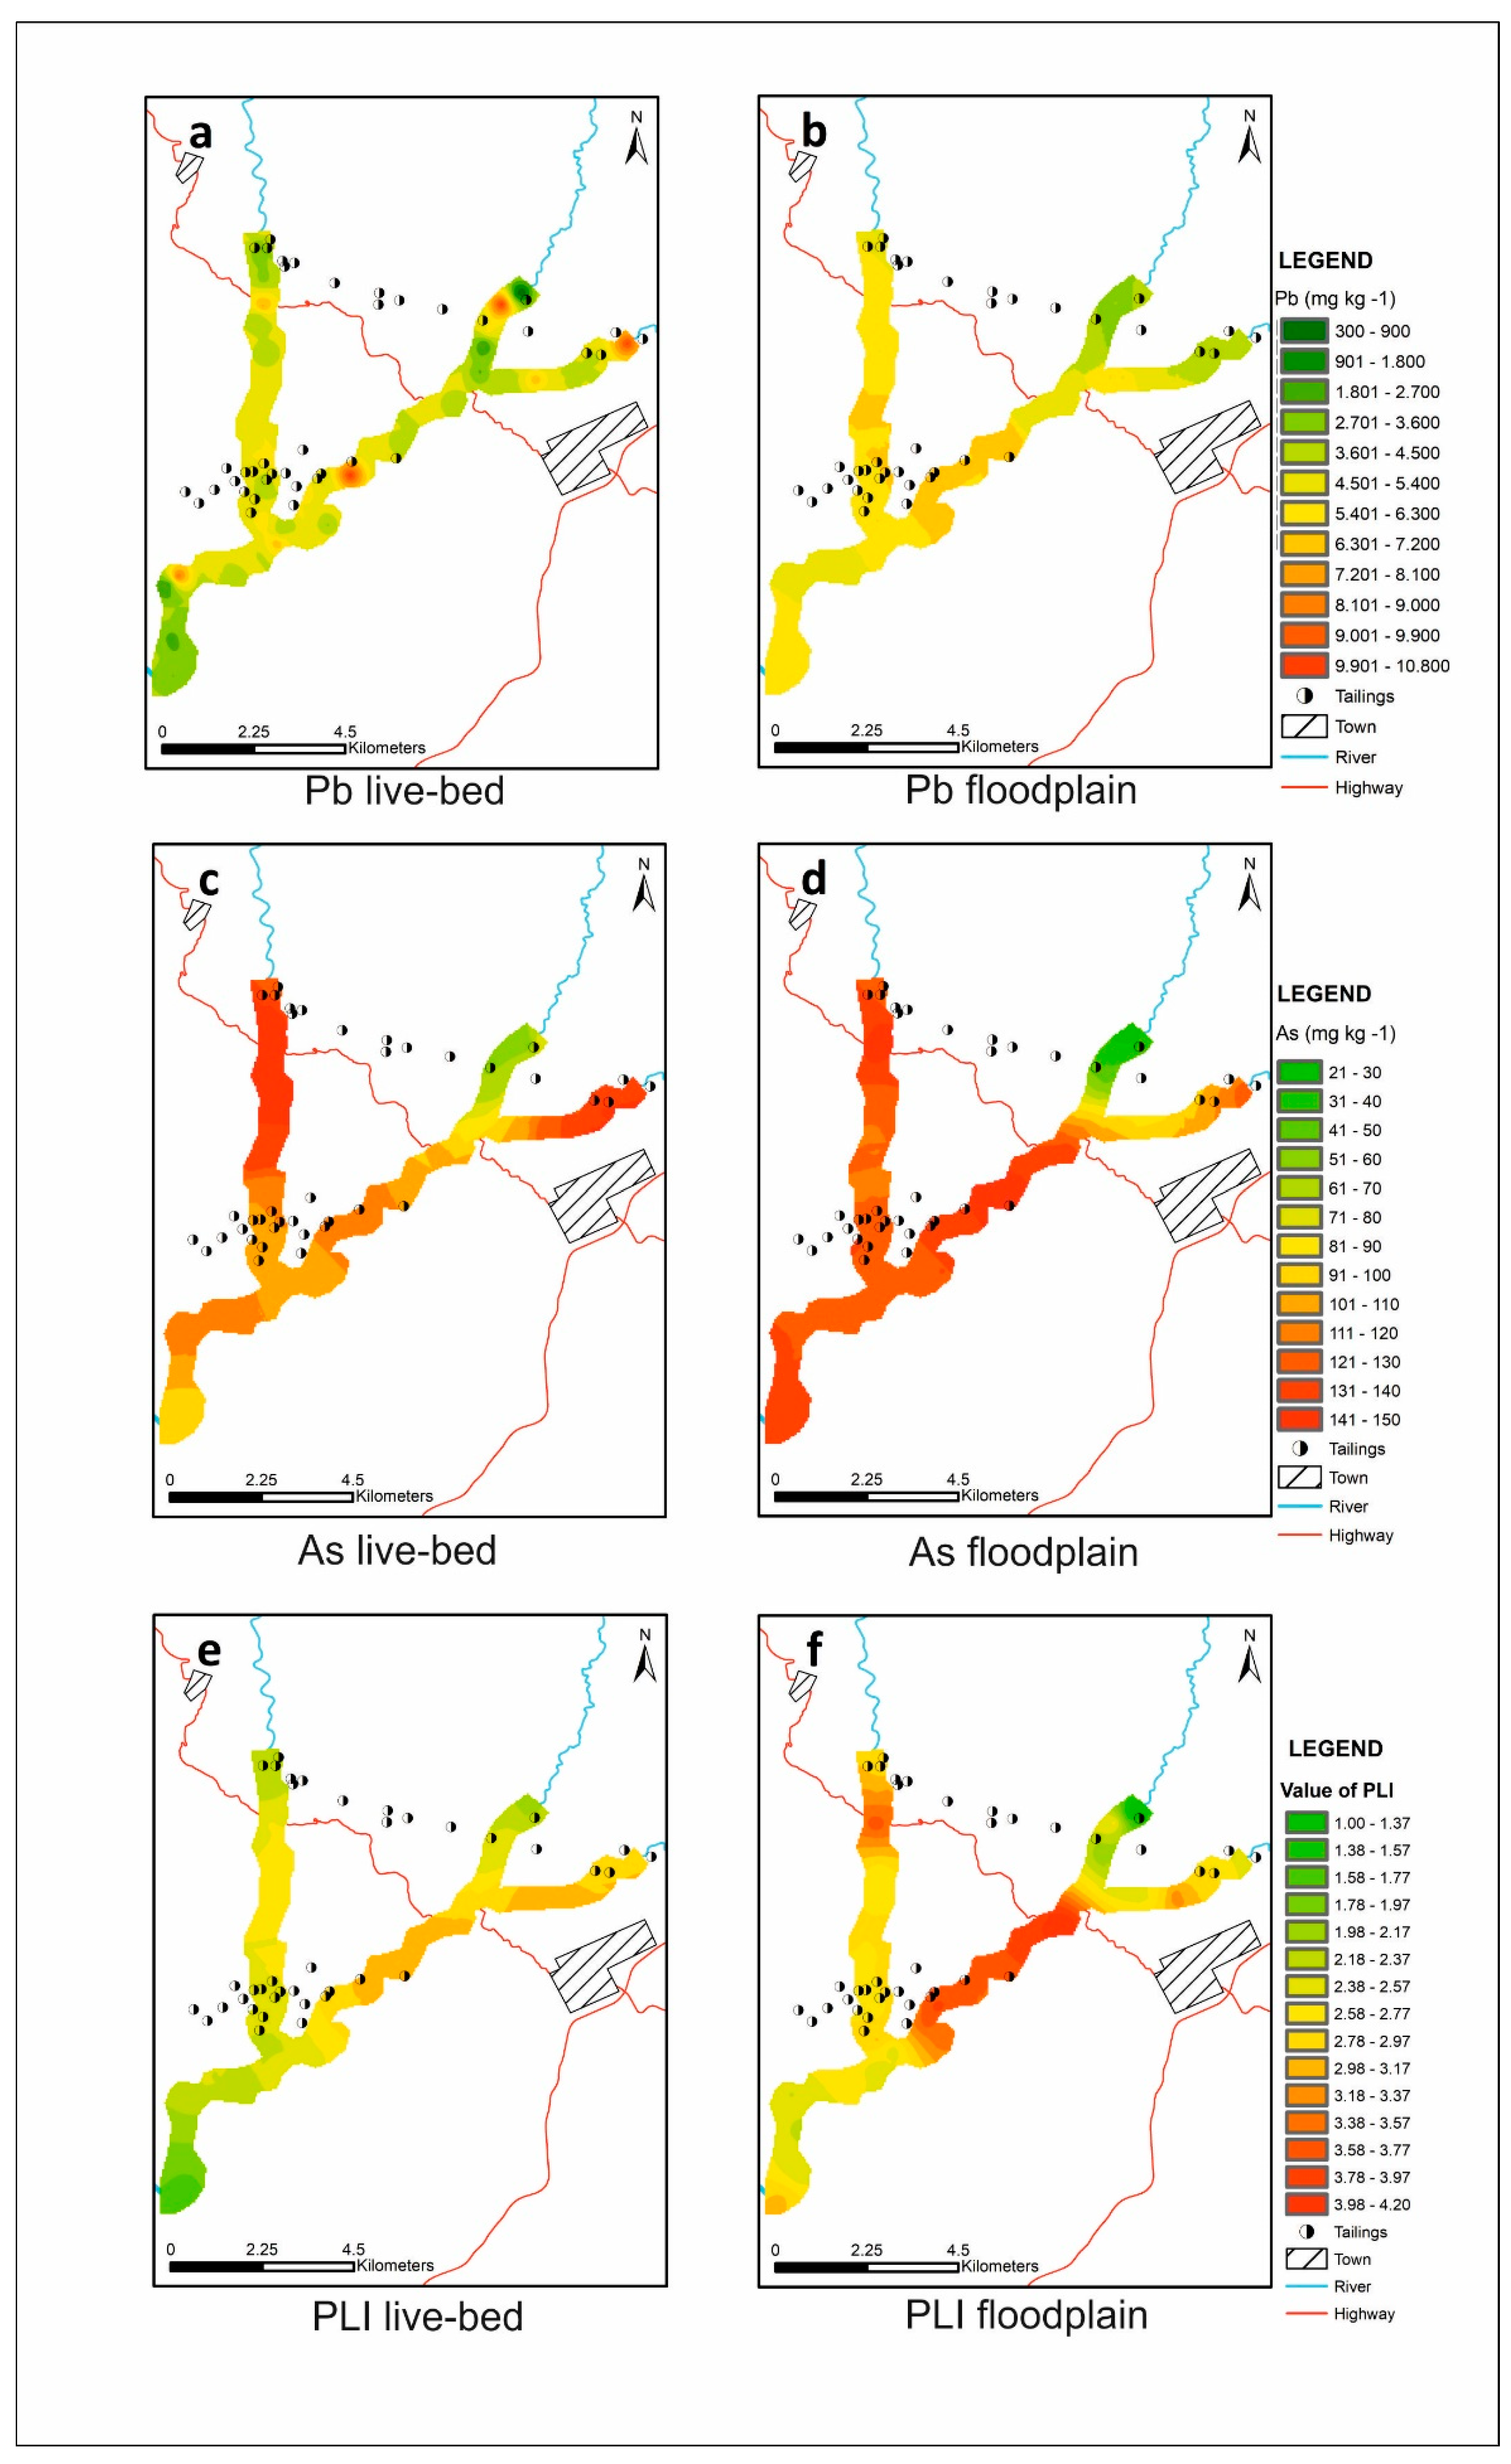 Geosciences Free Full Text Metal Loid S Transport In Hydrographic Networks Of Mining Basins The Case Of The La Carolina Mining District Southeast Spain Html